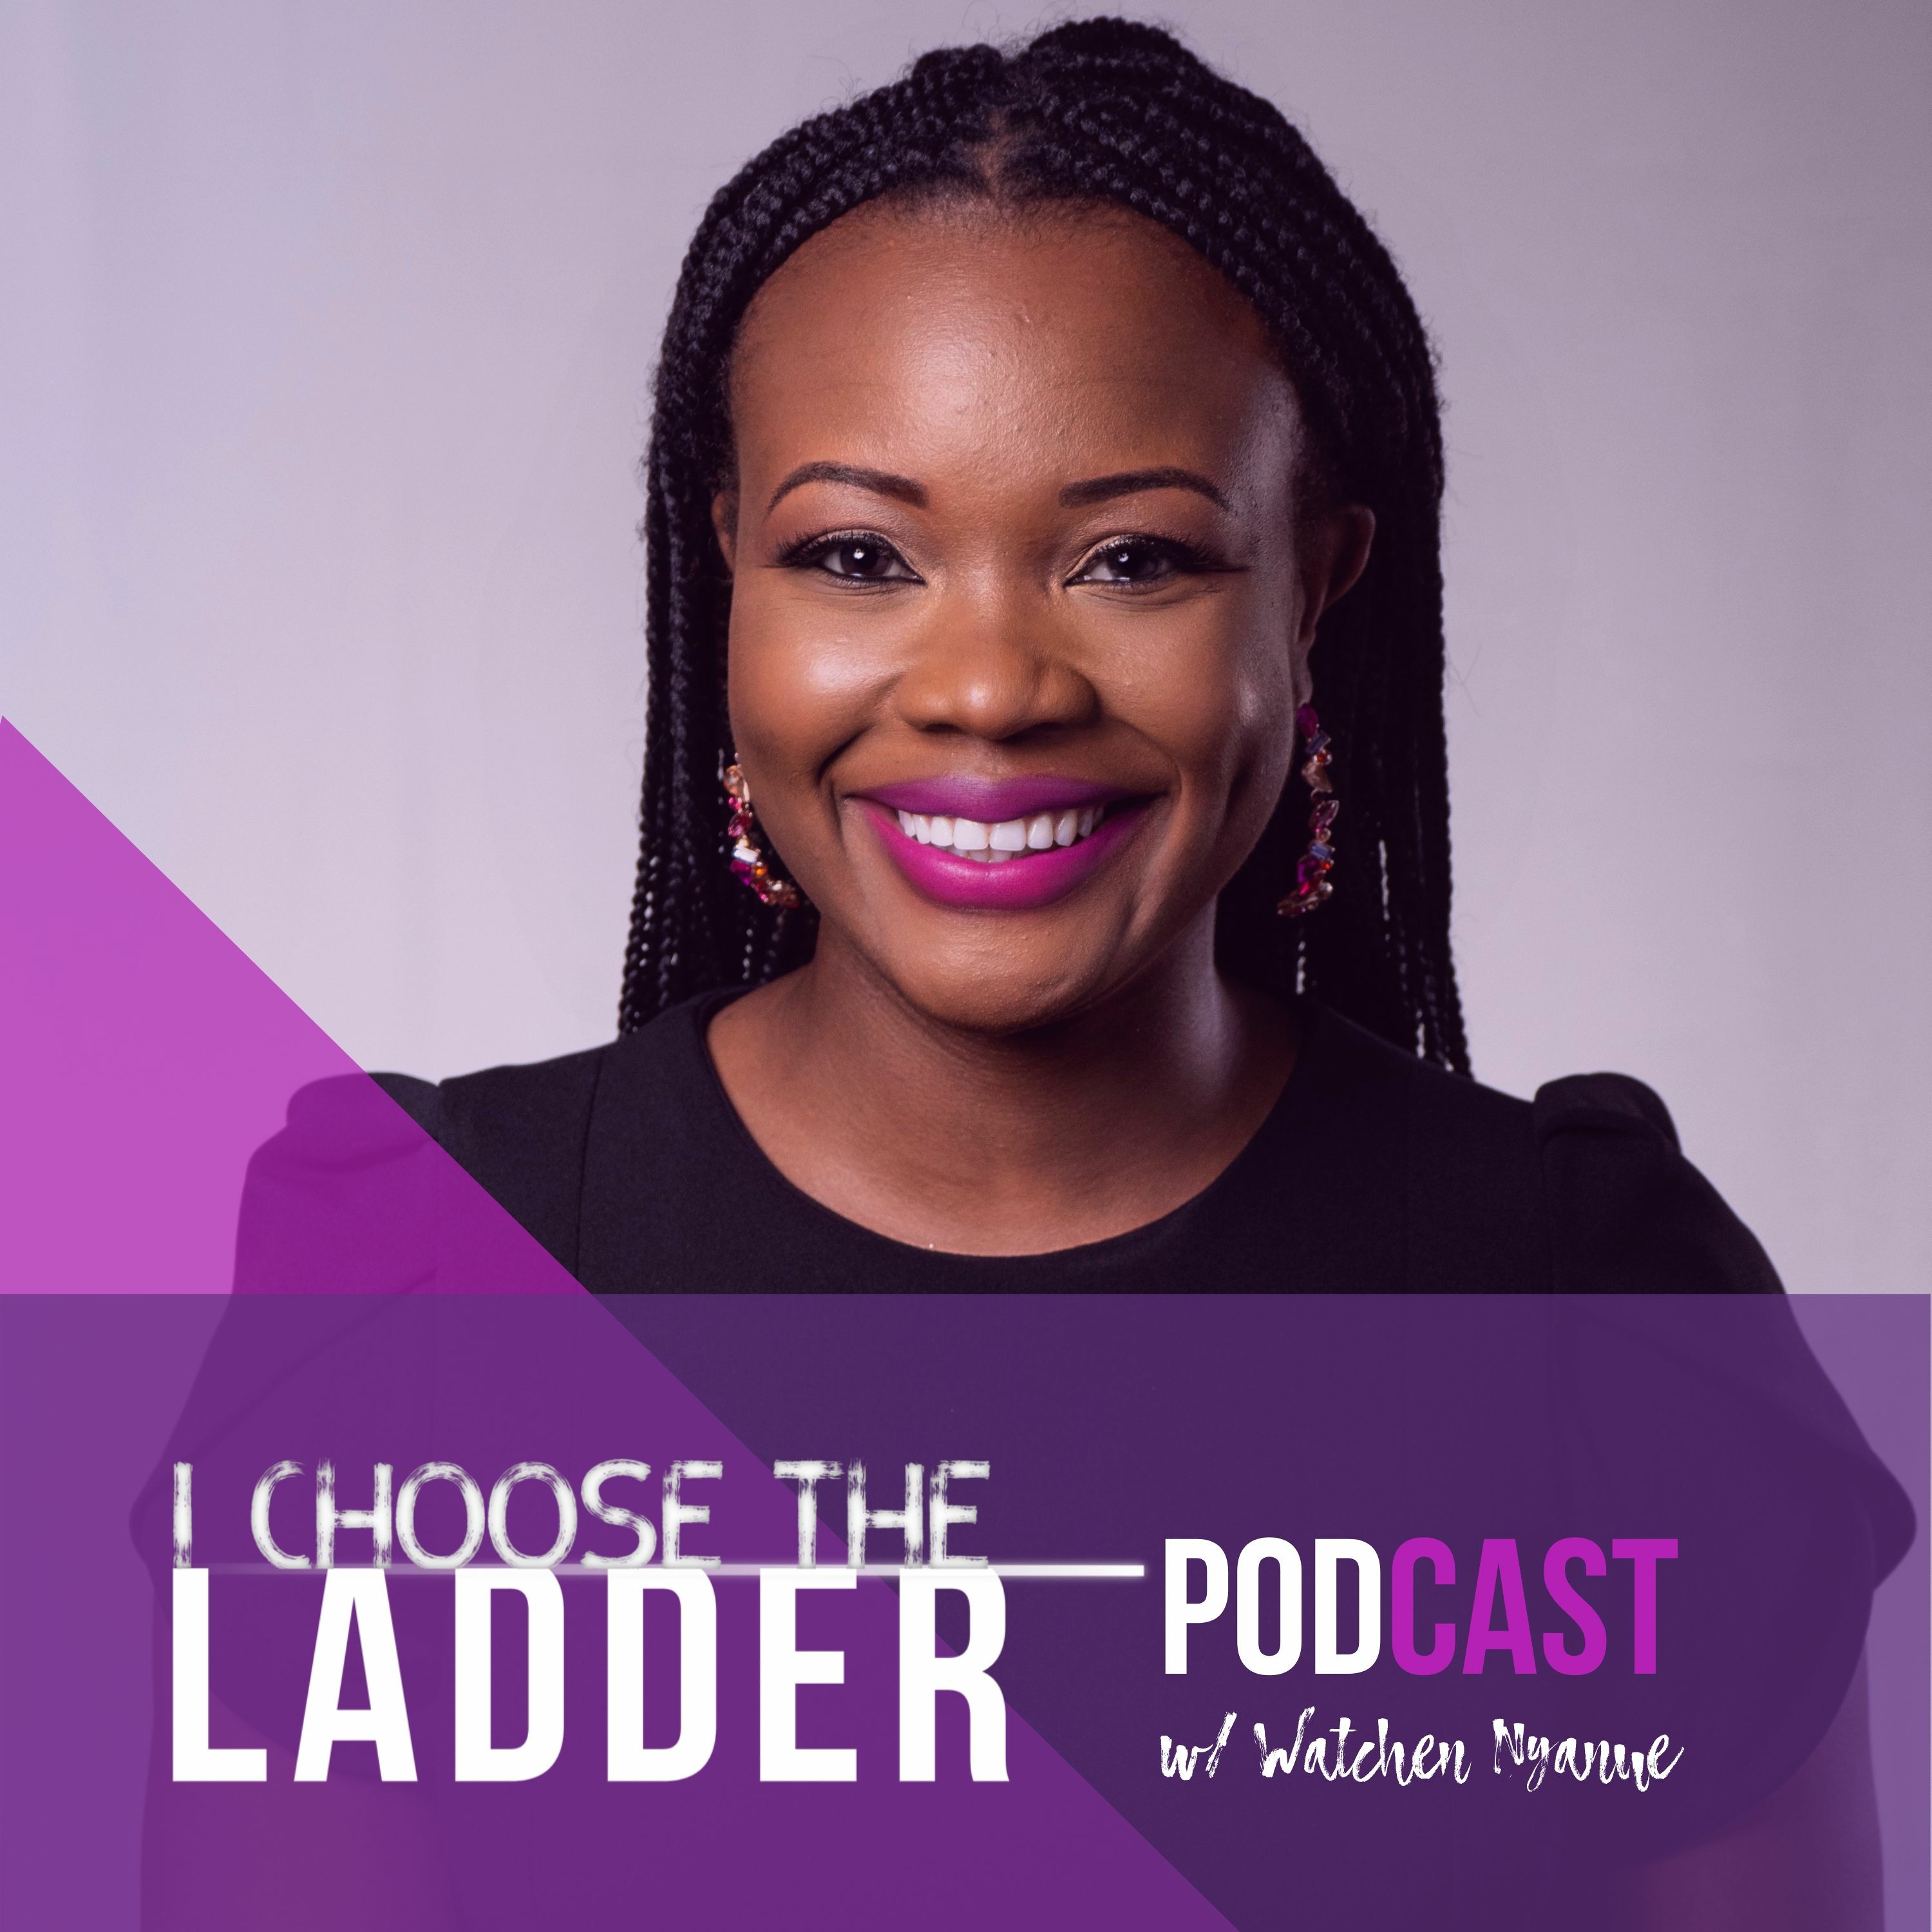 Ep 93 - Meet Rae Livingston, Chief Equity Officer at AbbVie